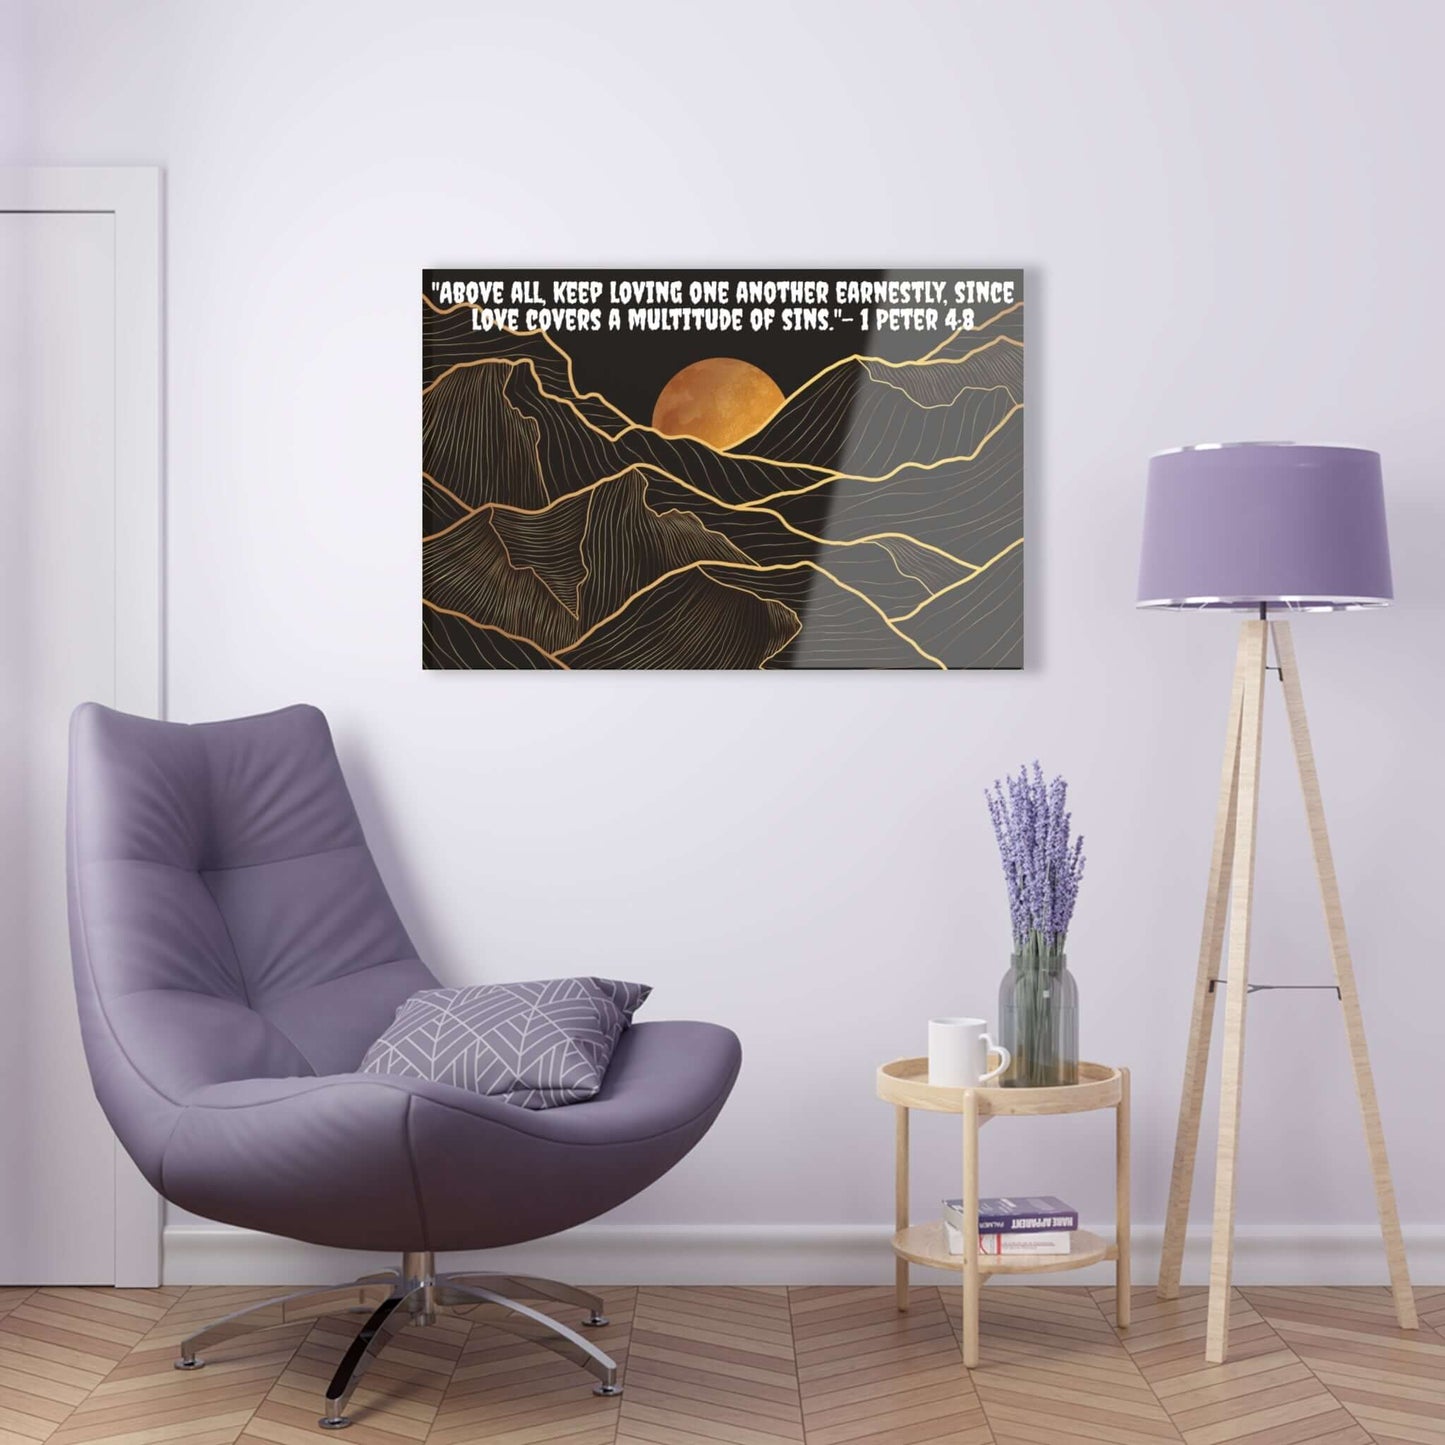 Abstract Black Wall Art - Acrylic Print with 1 Peter 4:8 | Art & Wall Decor,Assembled in the USA,Assembled in USA,Decor,Home & Living,Home Decor,Indoor,Made in the USA,Made in USA,Poster